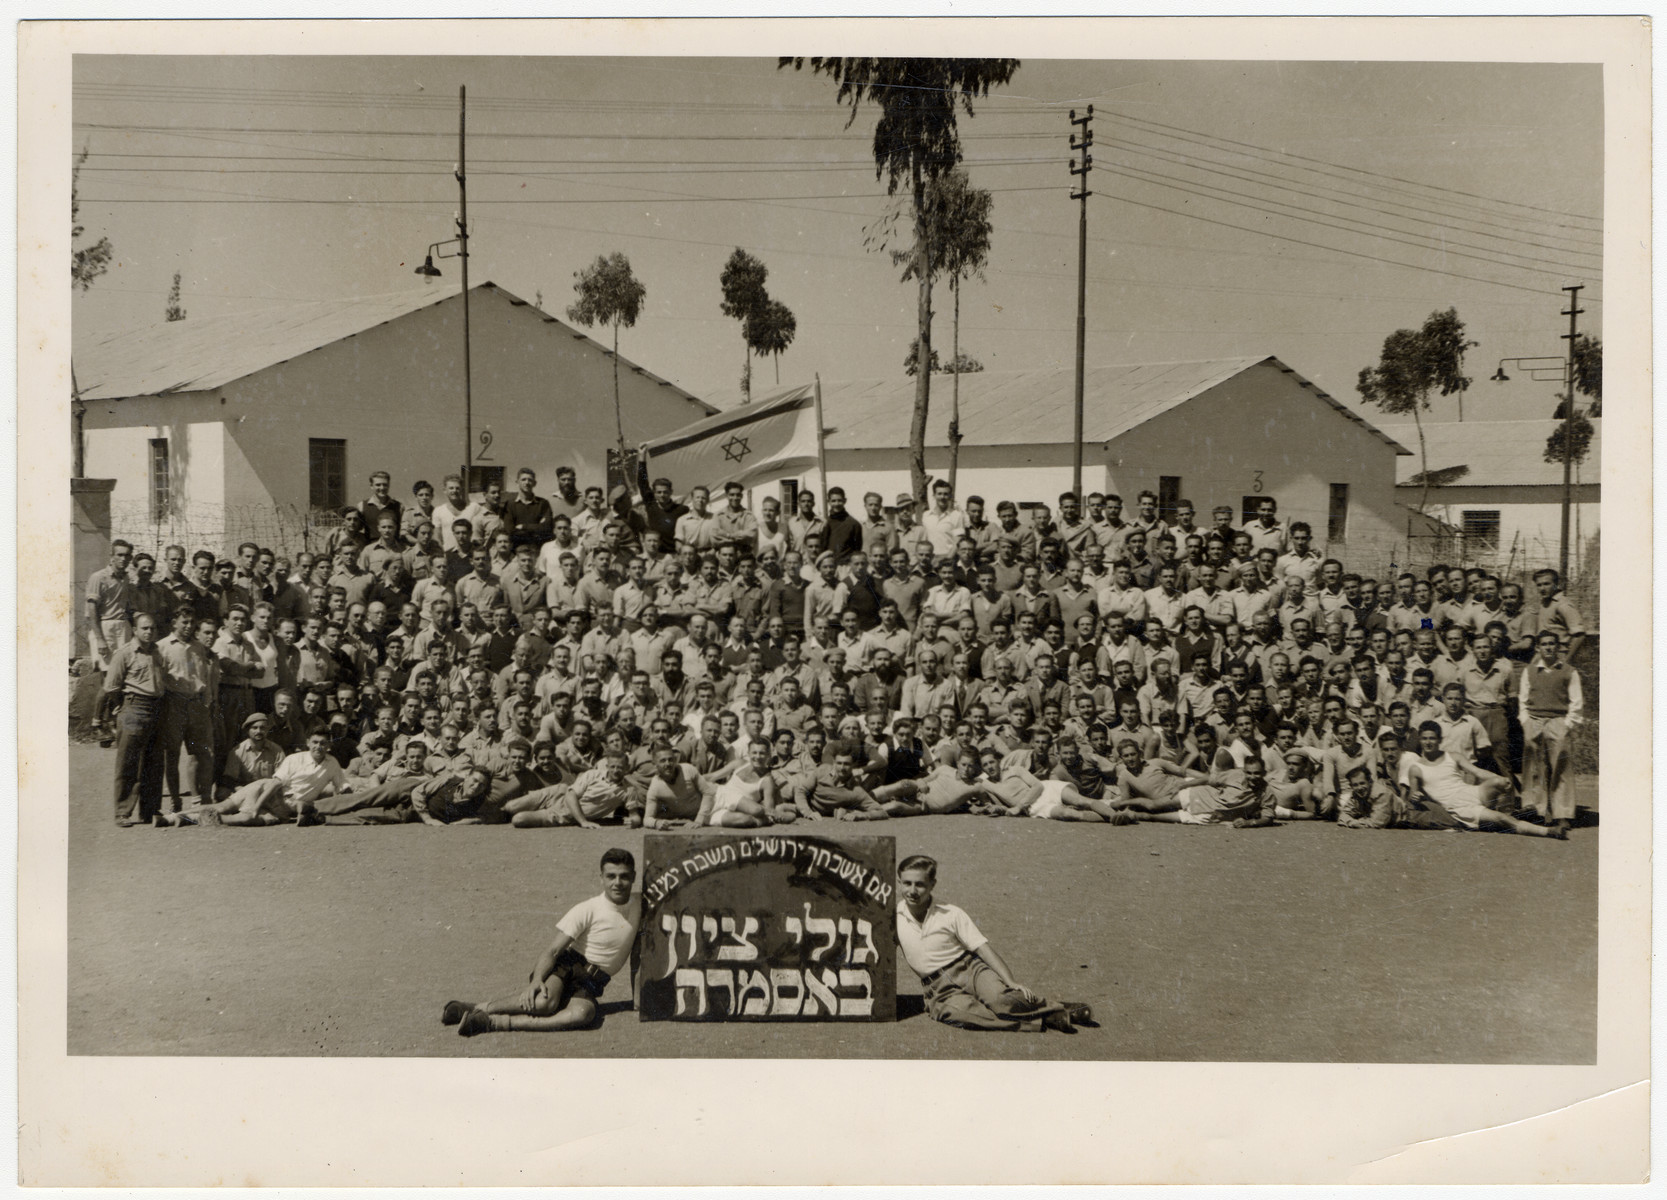 Group portrait of Zionist youth who were deported from Palestine and interned by the British in Asmara.  Most of them were members of either the Irgun or Lehi

The sign reads "If I forget thee O Jeruslaem, may my right arm be forgotten.  Zionist exiles in Asmara."